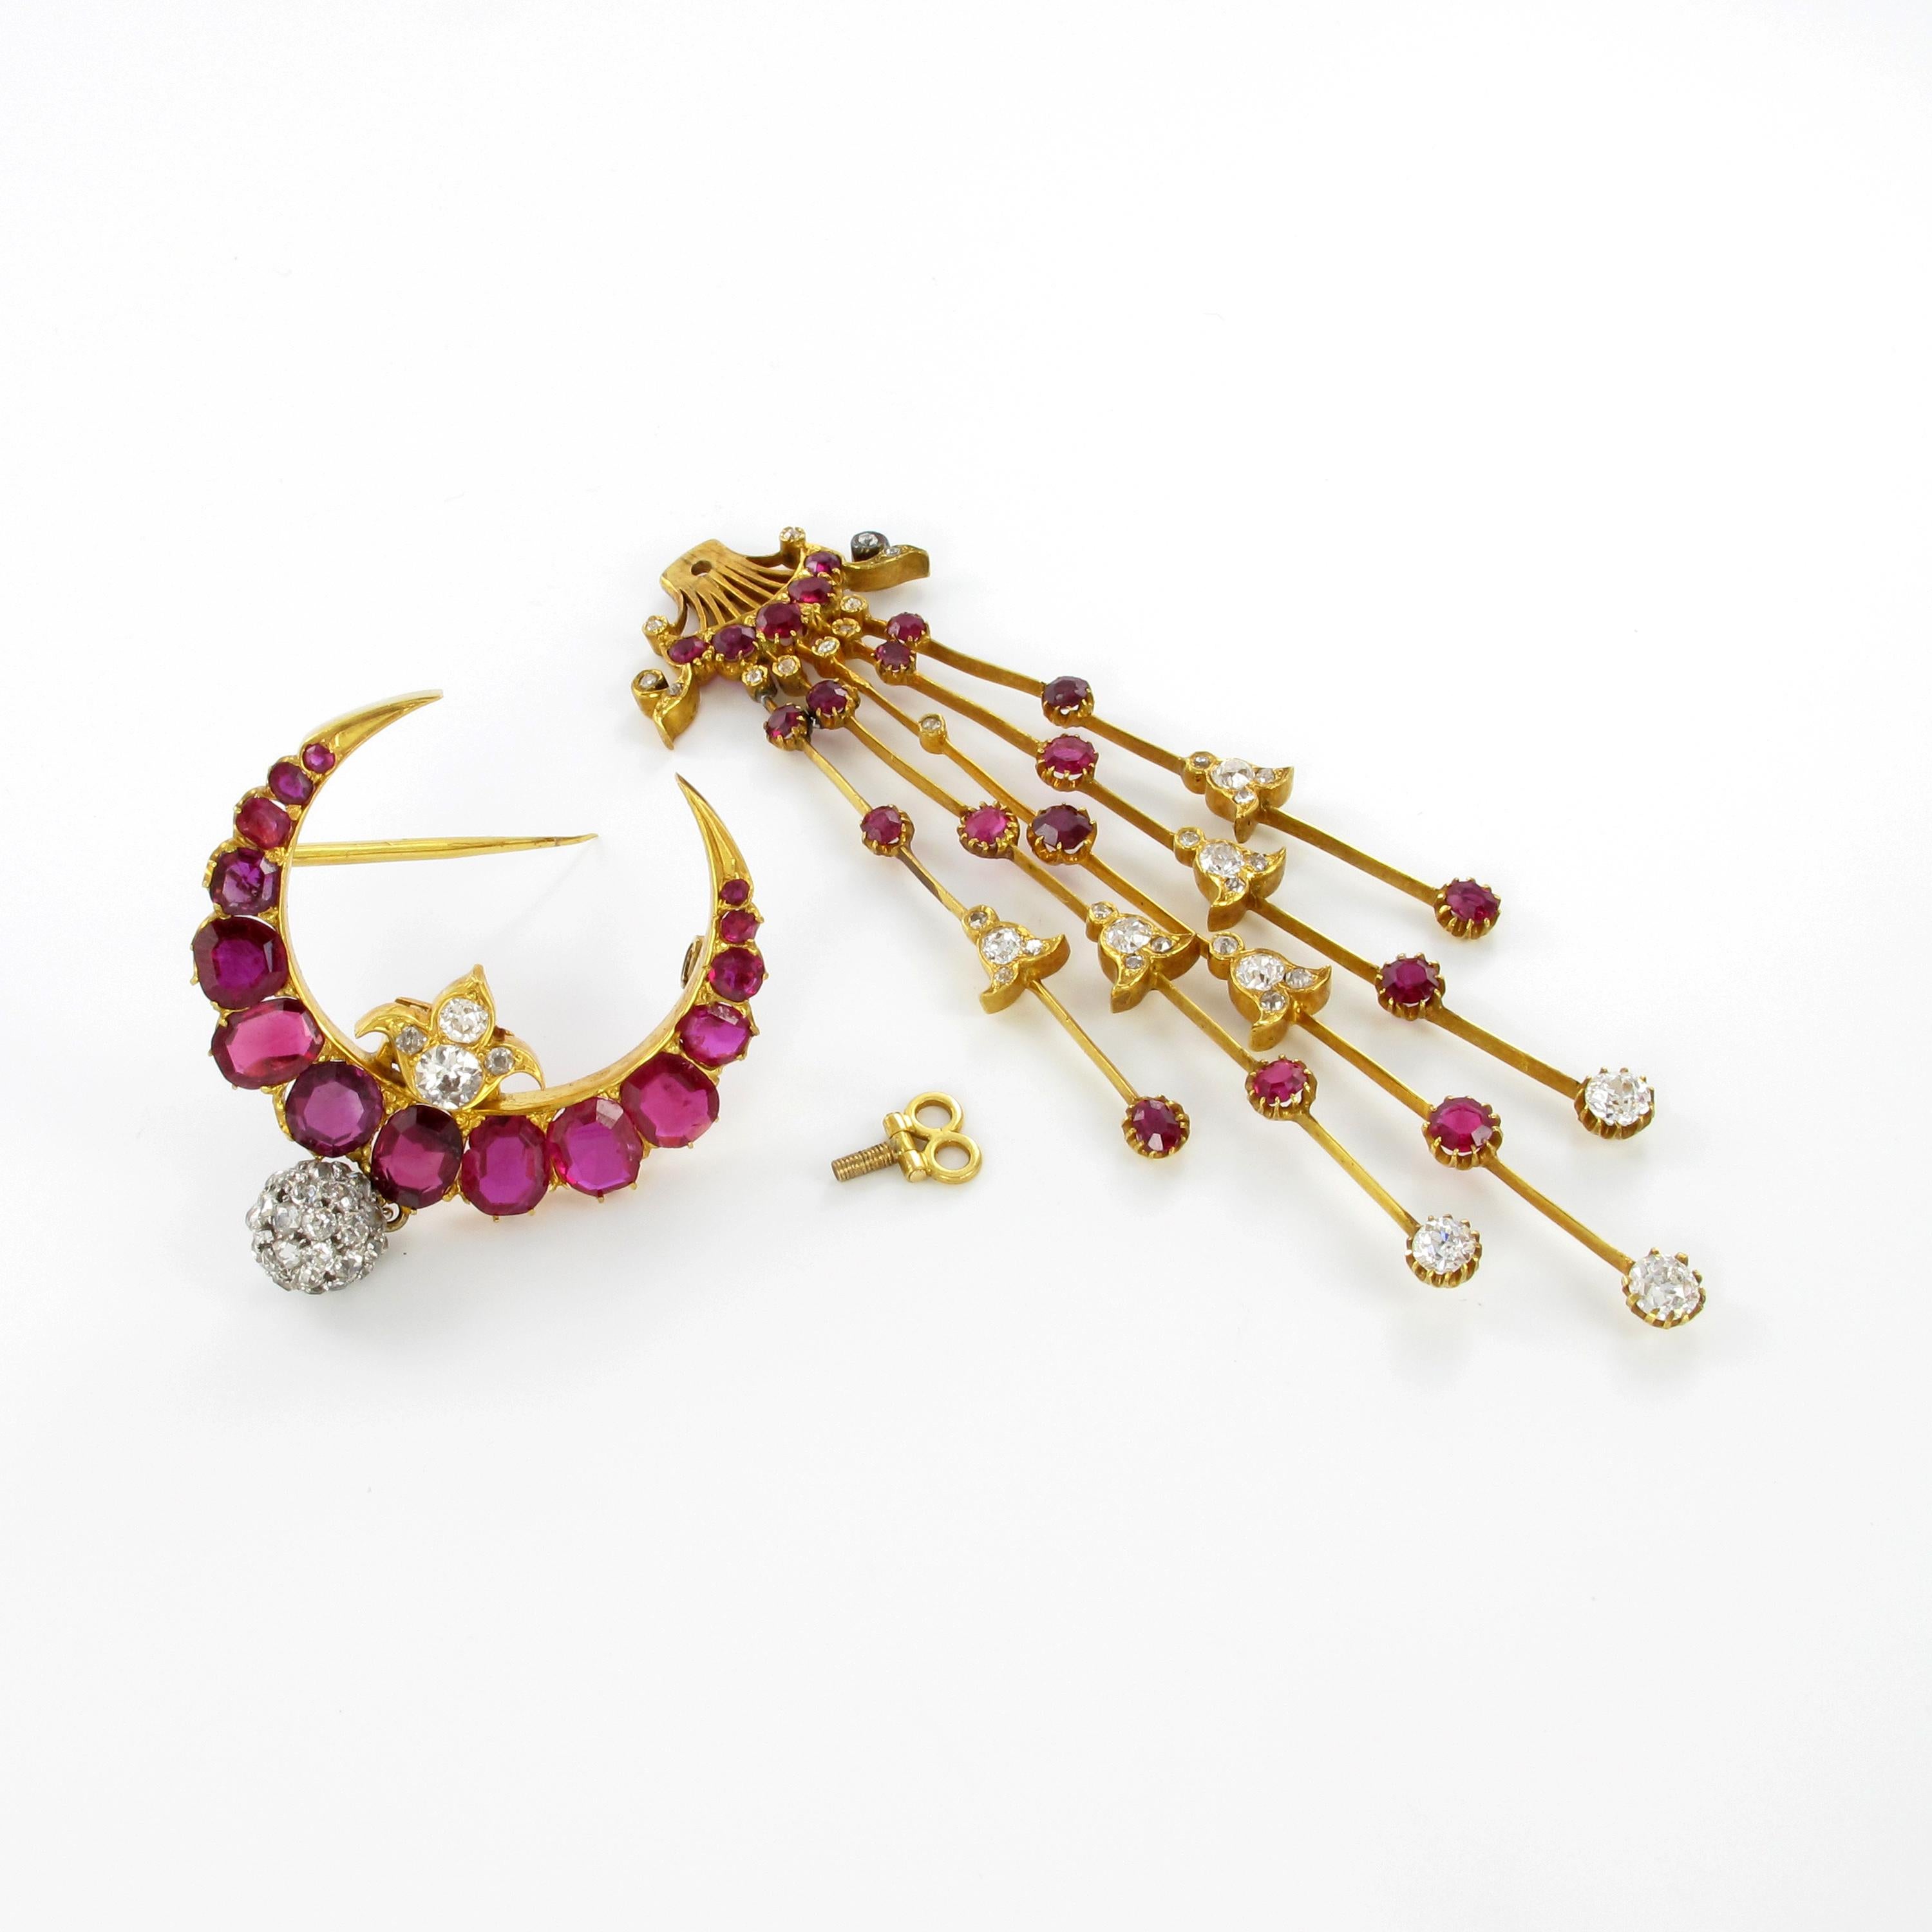 Magnificent Burma Ruby and Diamond Brooch or Pin or Head Ornament in Yellow Gold 5